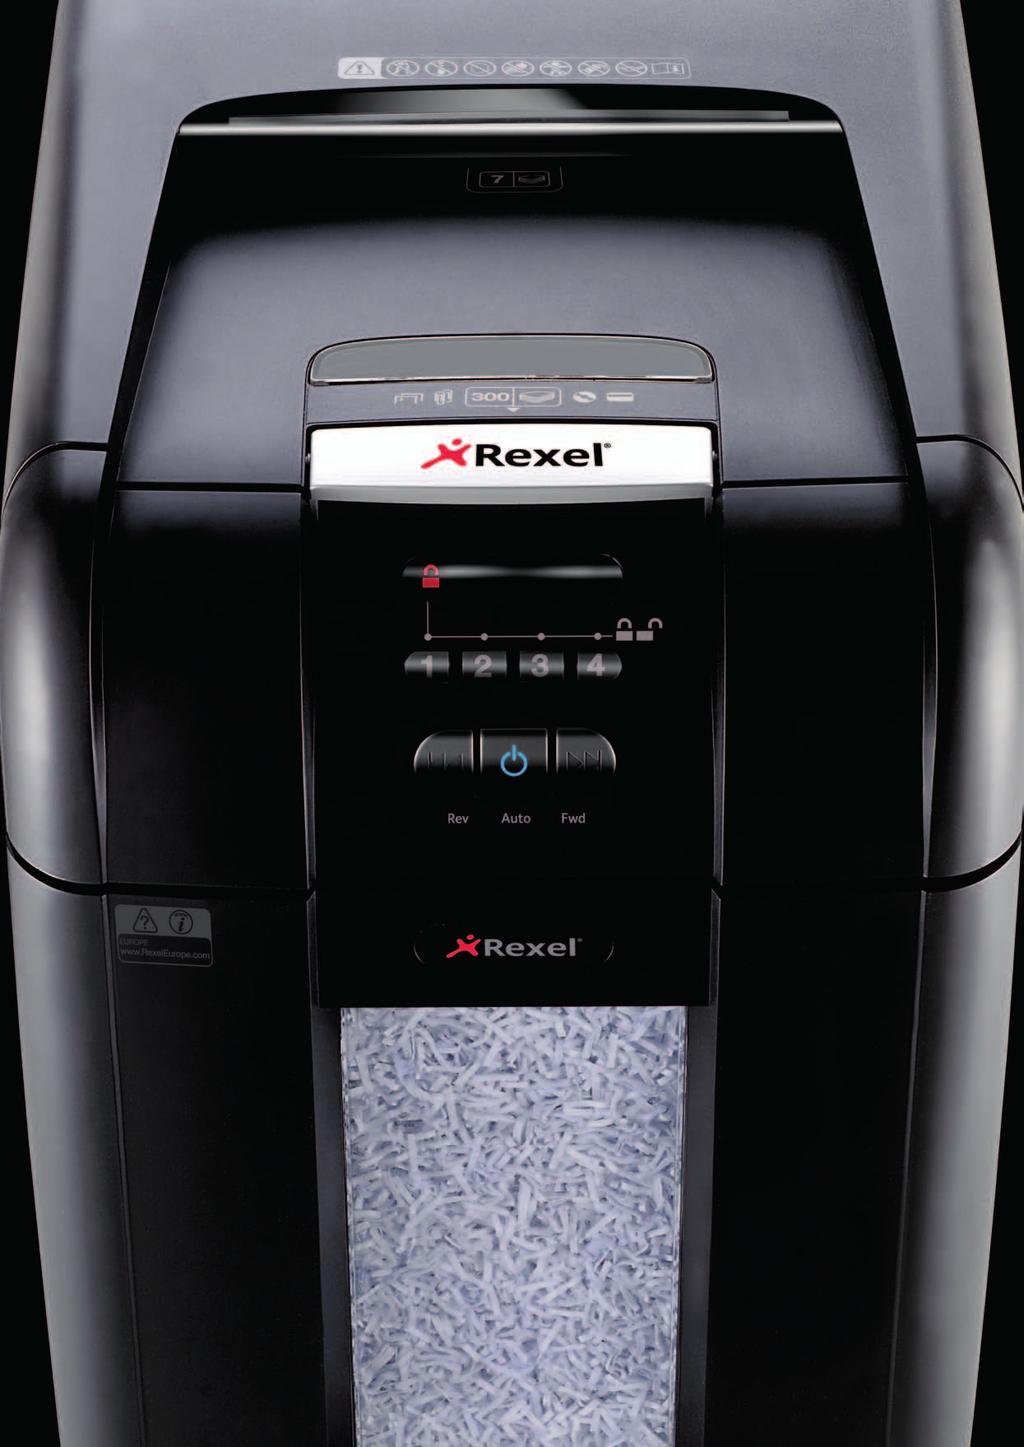 Rexel Auto Feed is the only complete shredding solution Patented technology lets you automatically stack and shred up to 750 sheets at a time MOST cost EFFECTIVE Up to 65% less cost than using a